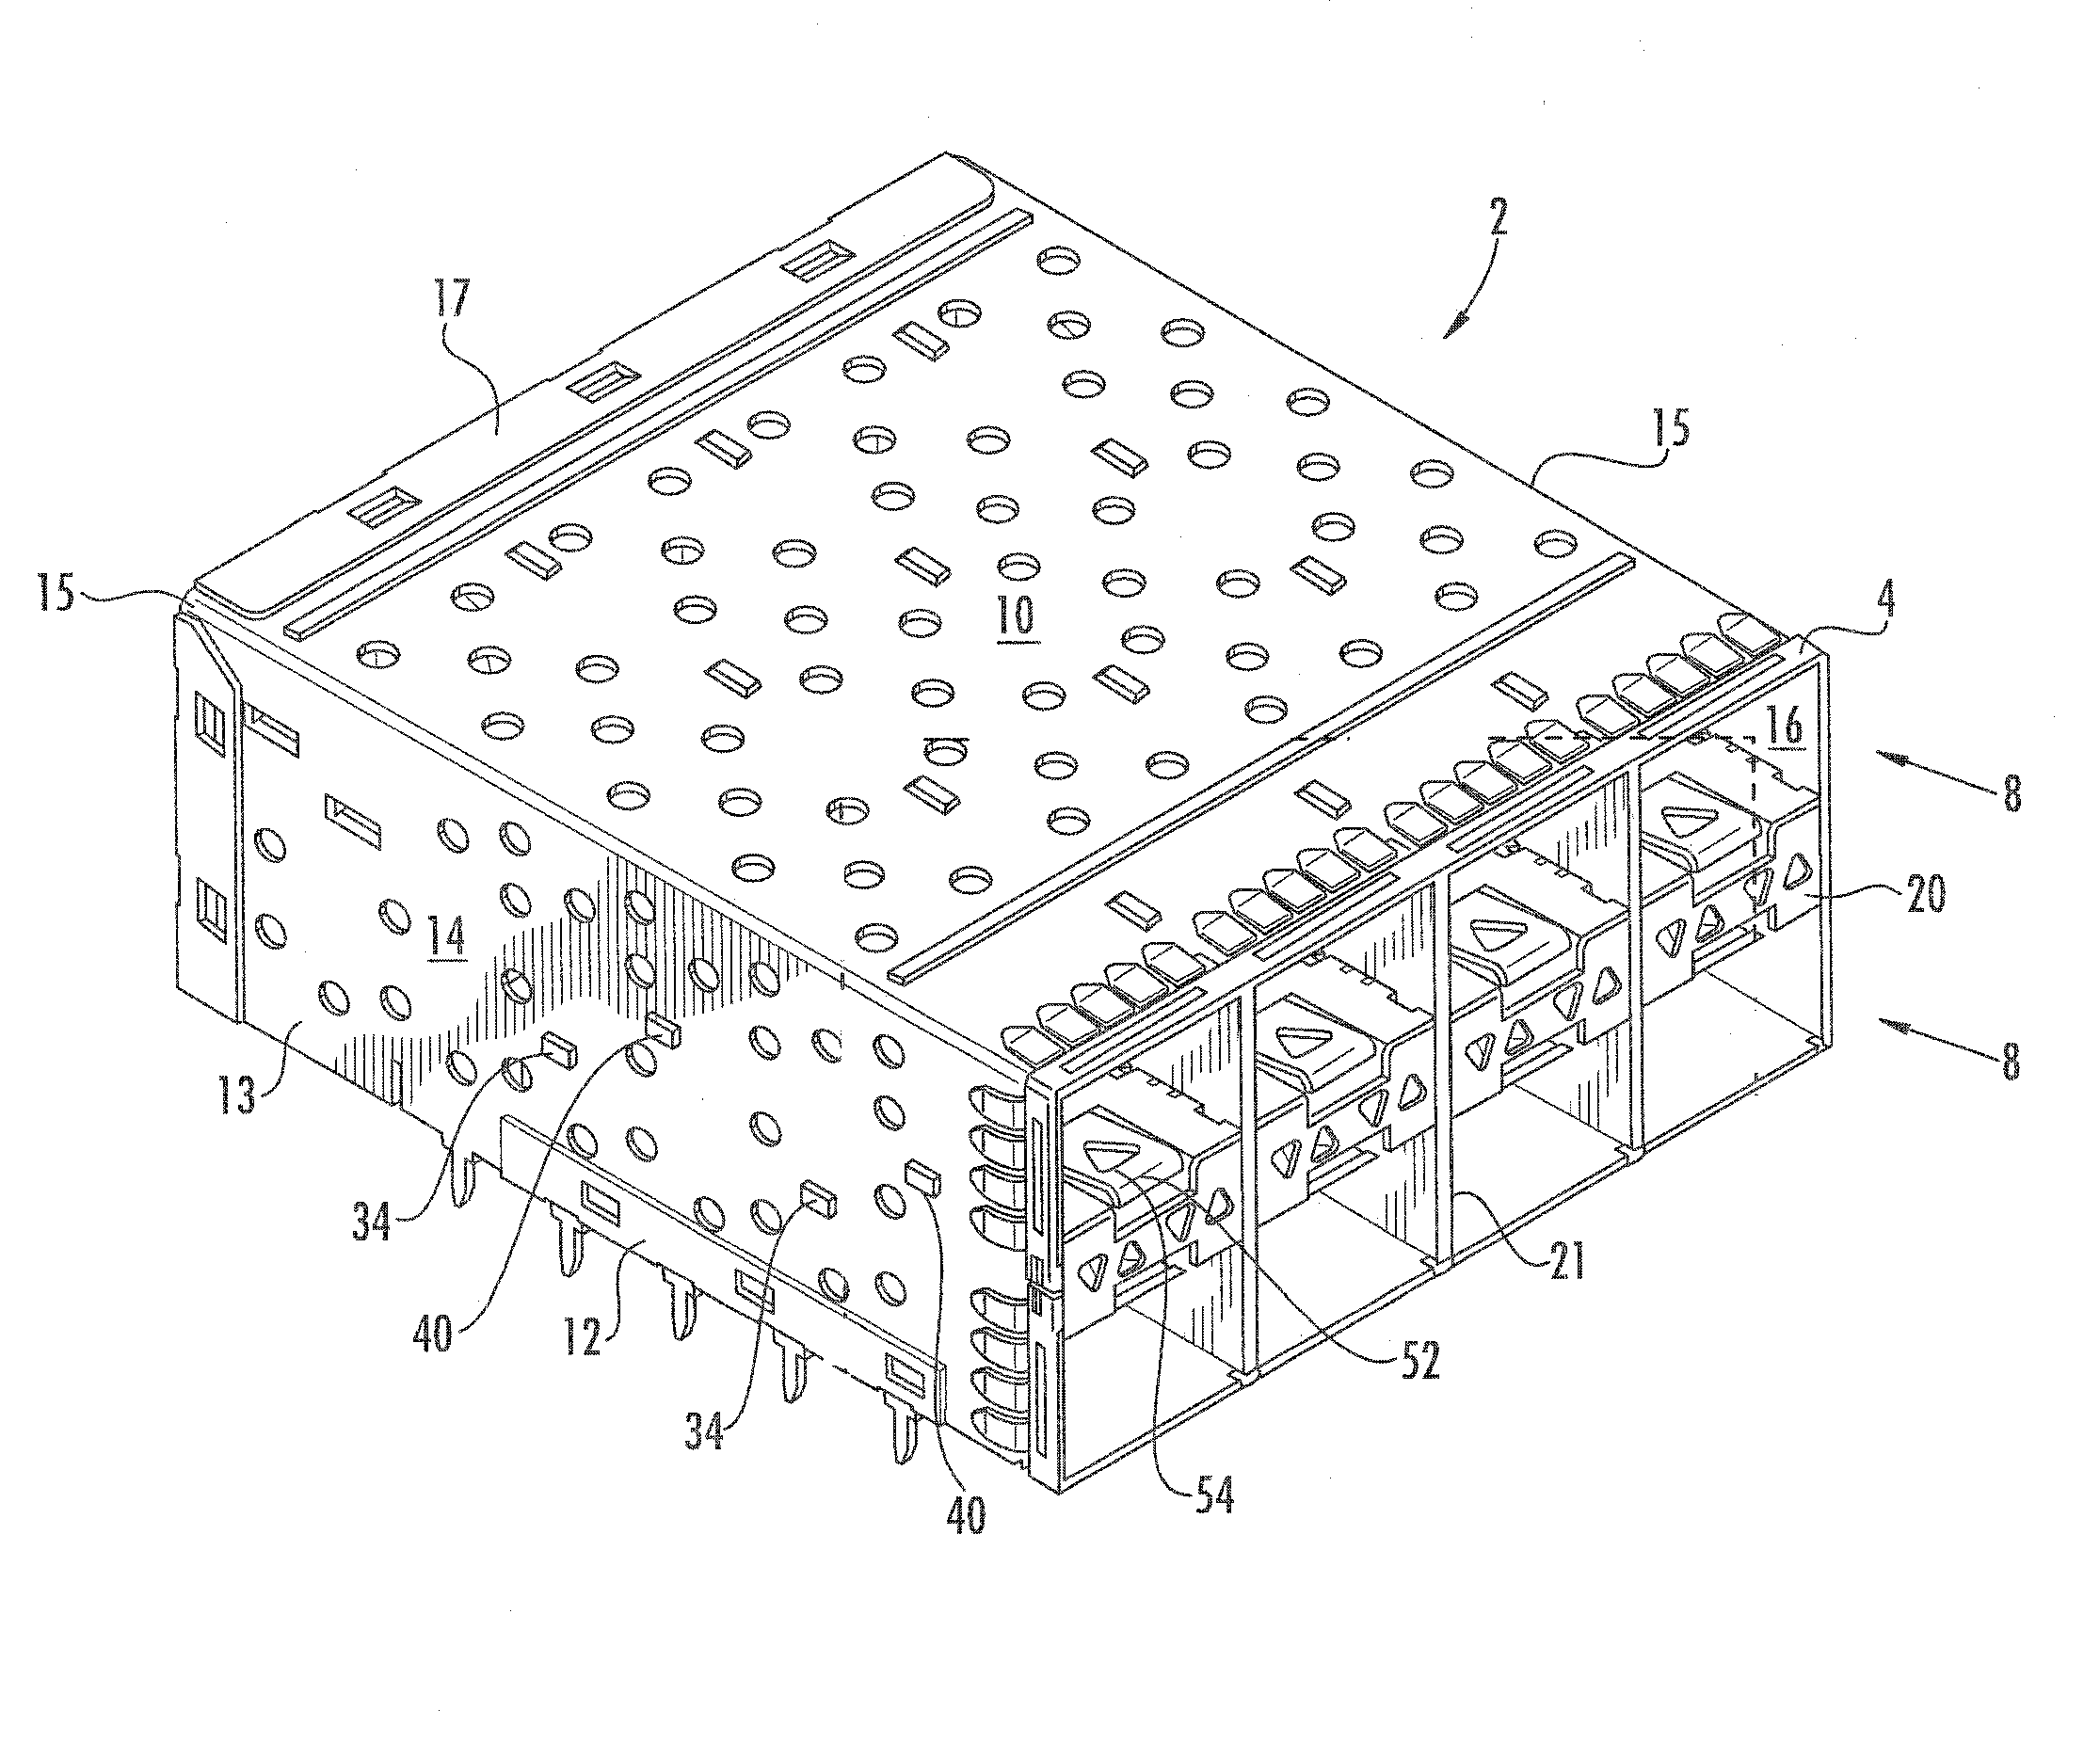 Connector shielding apparatus and methods